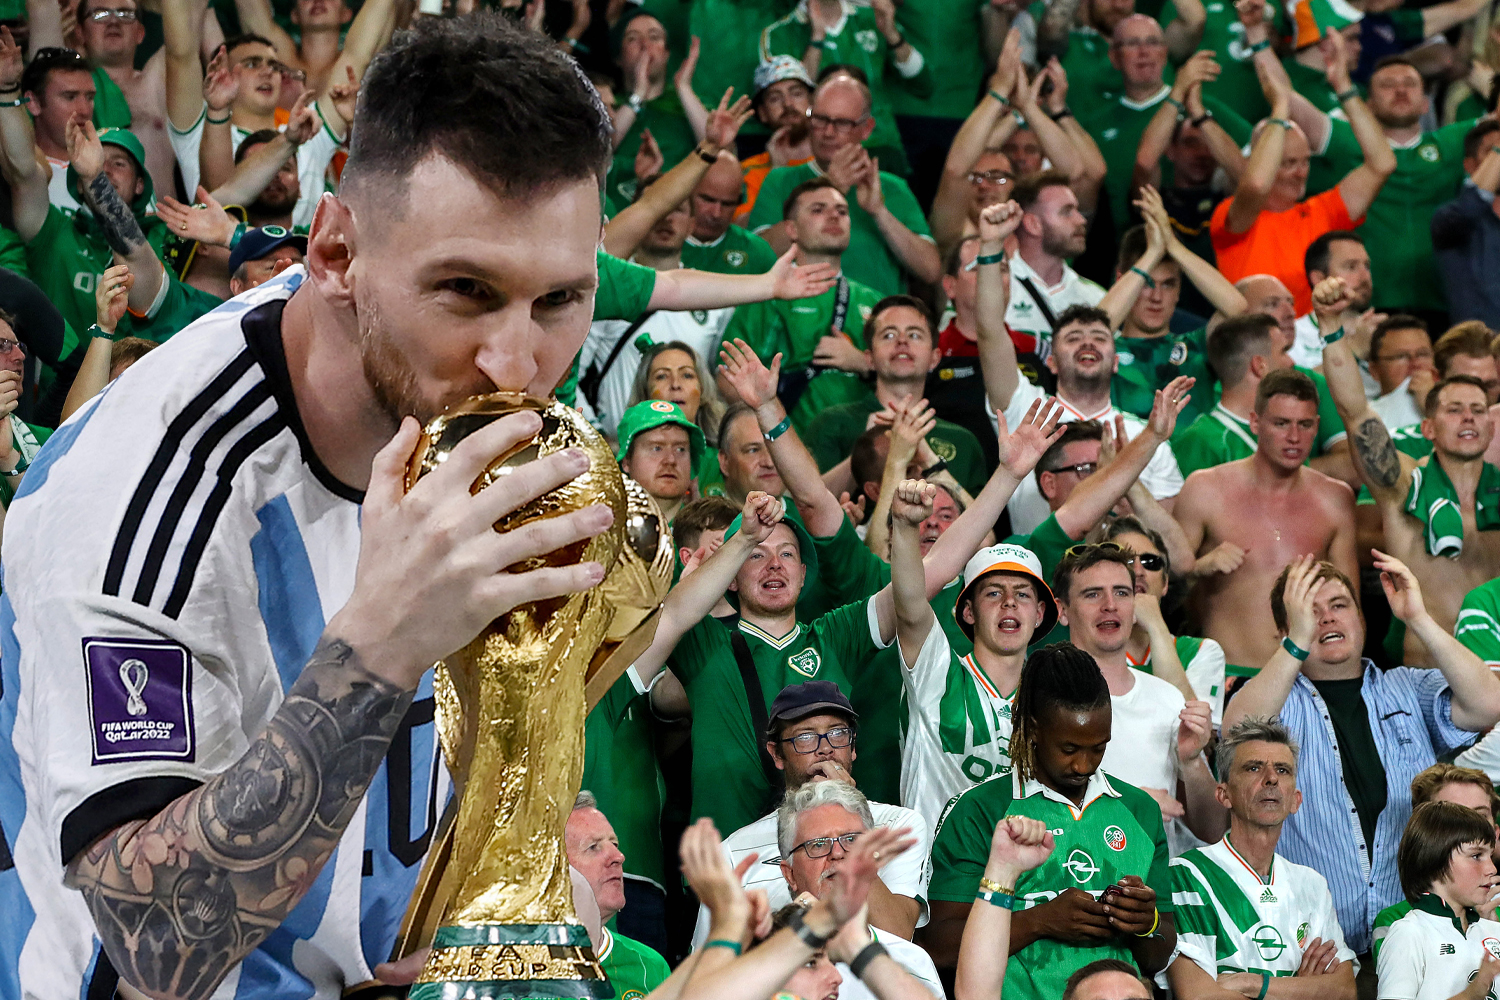 Republic of Ireland fans chant Lionel Messi's name during defeat to France while one supporter parades shirt